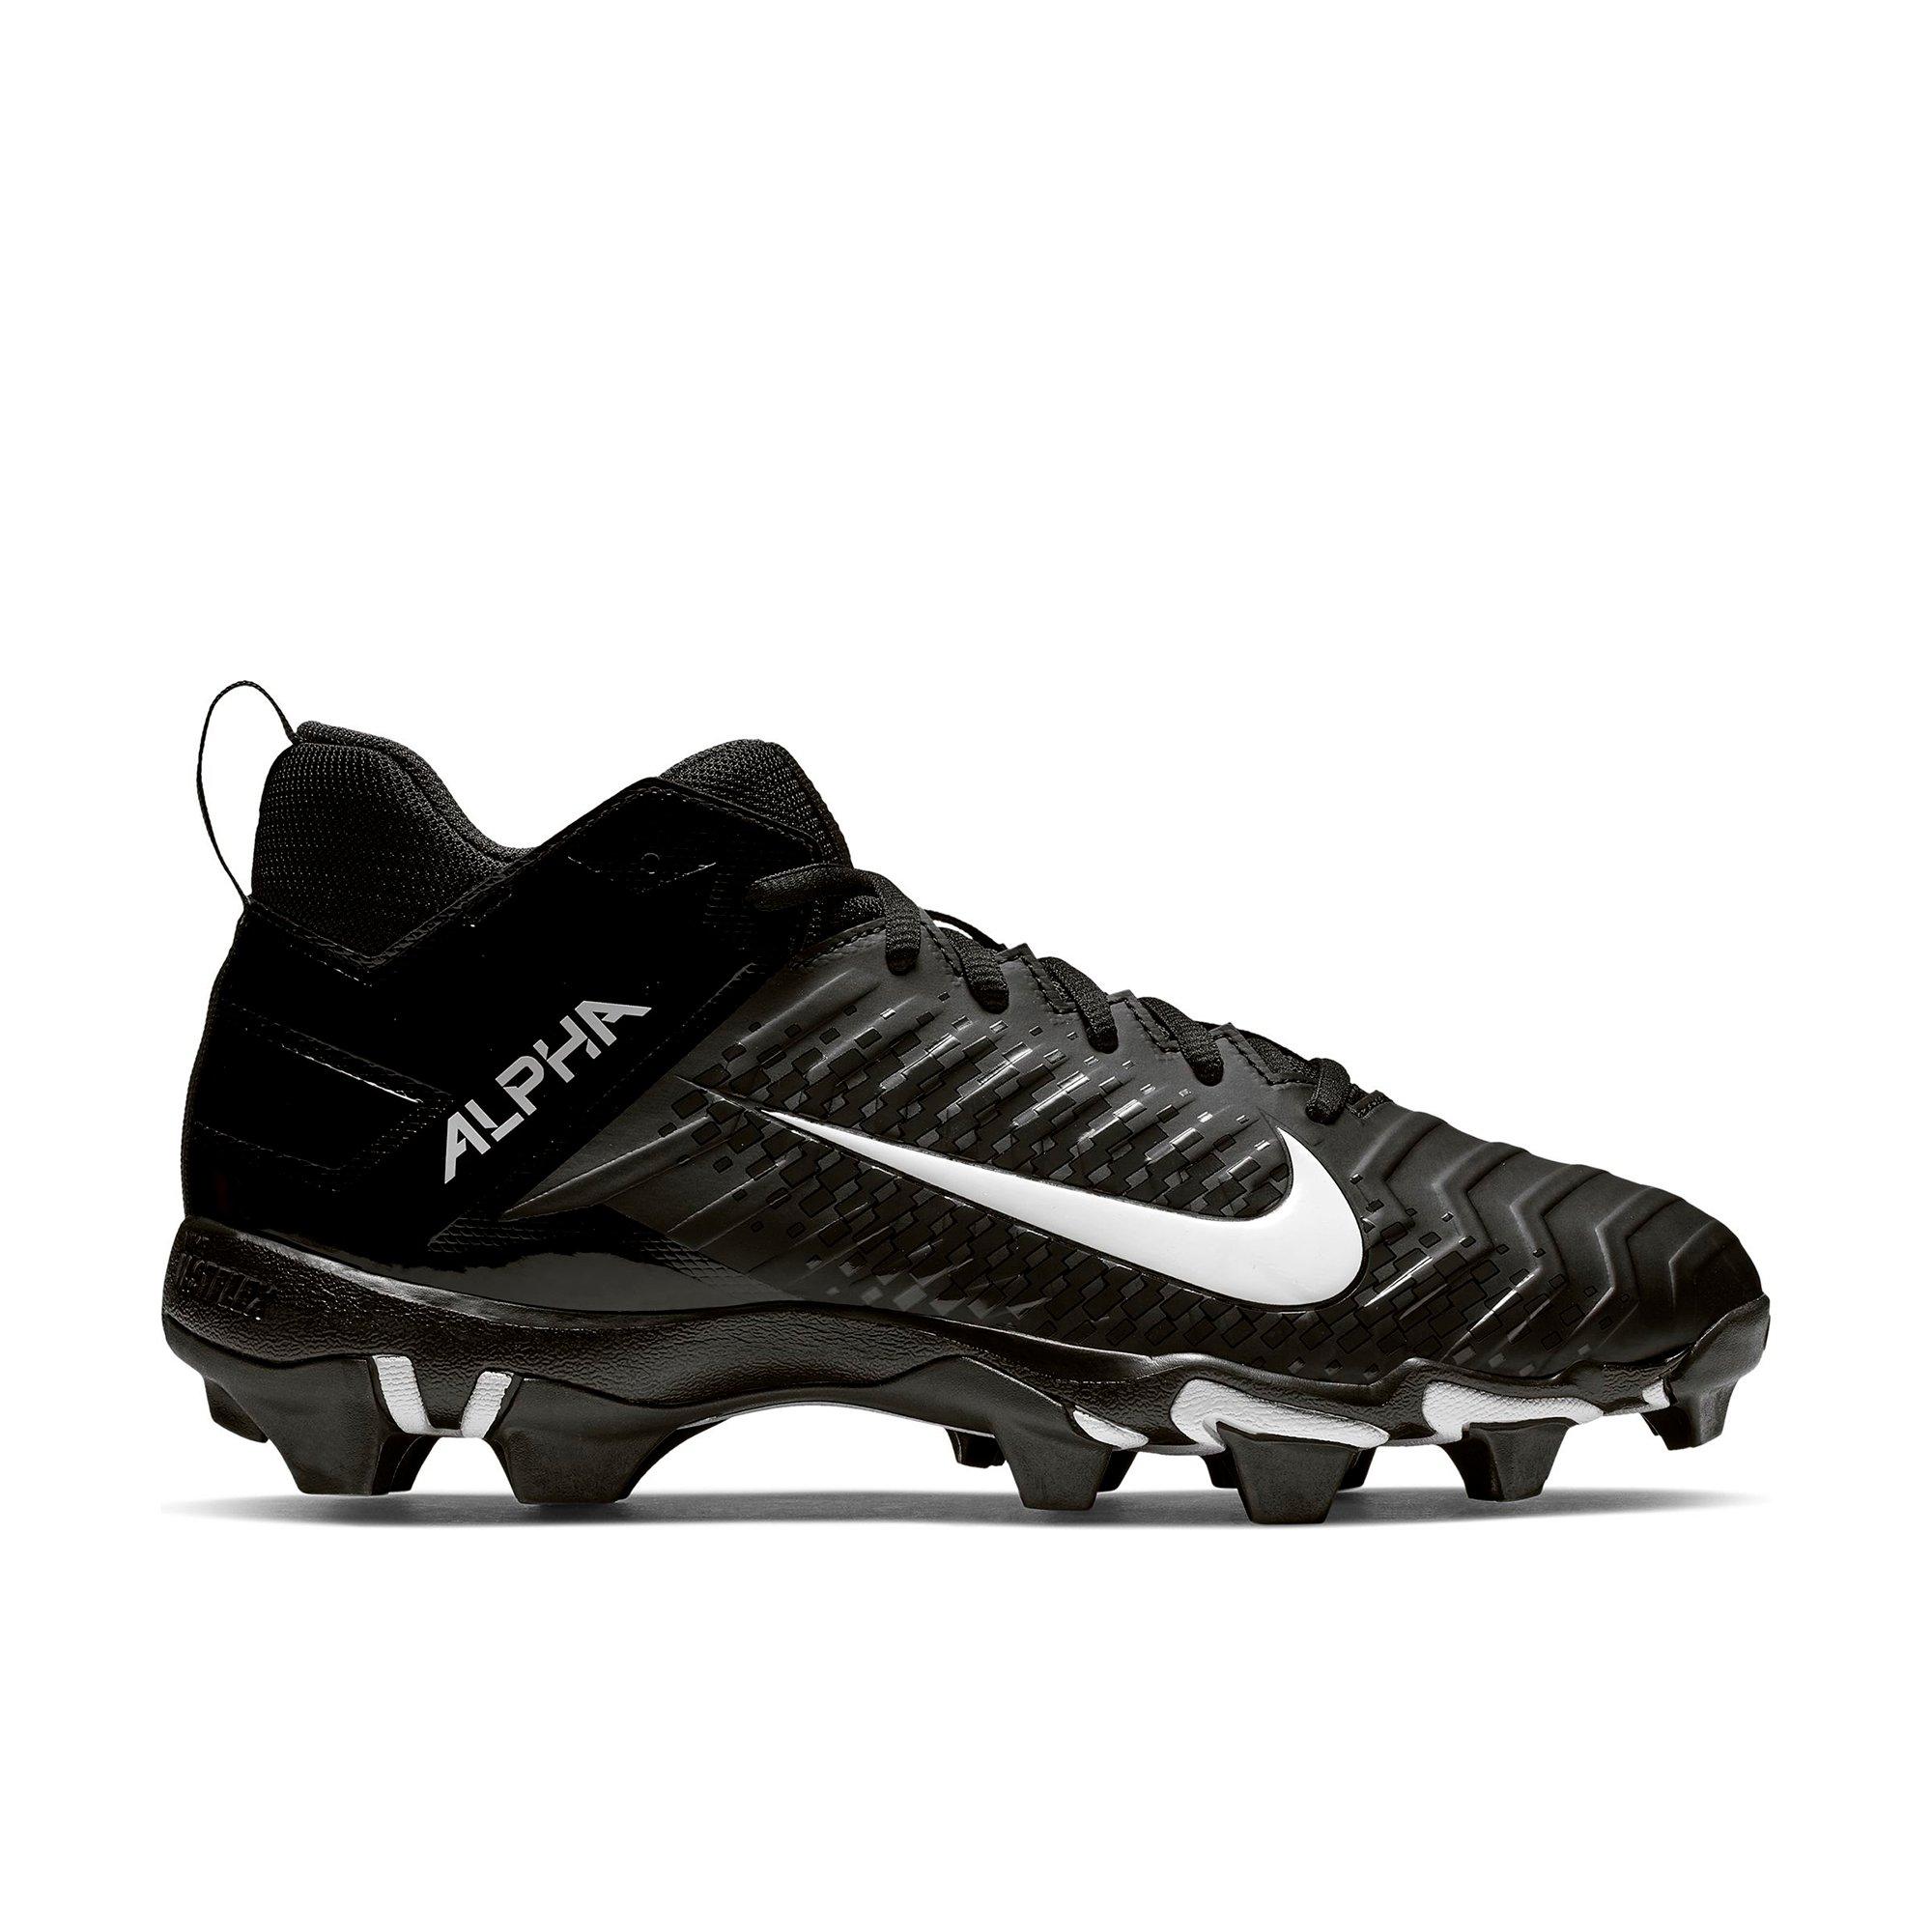 size 11 football cleats